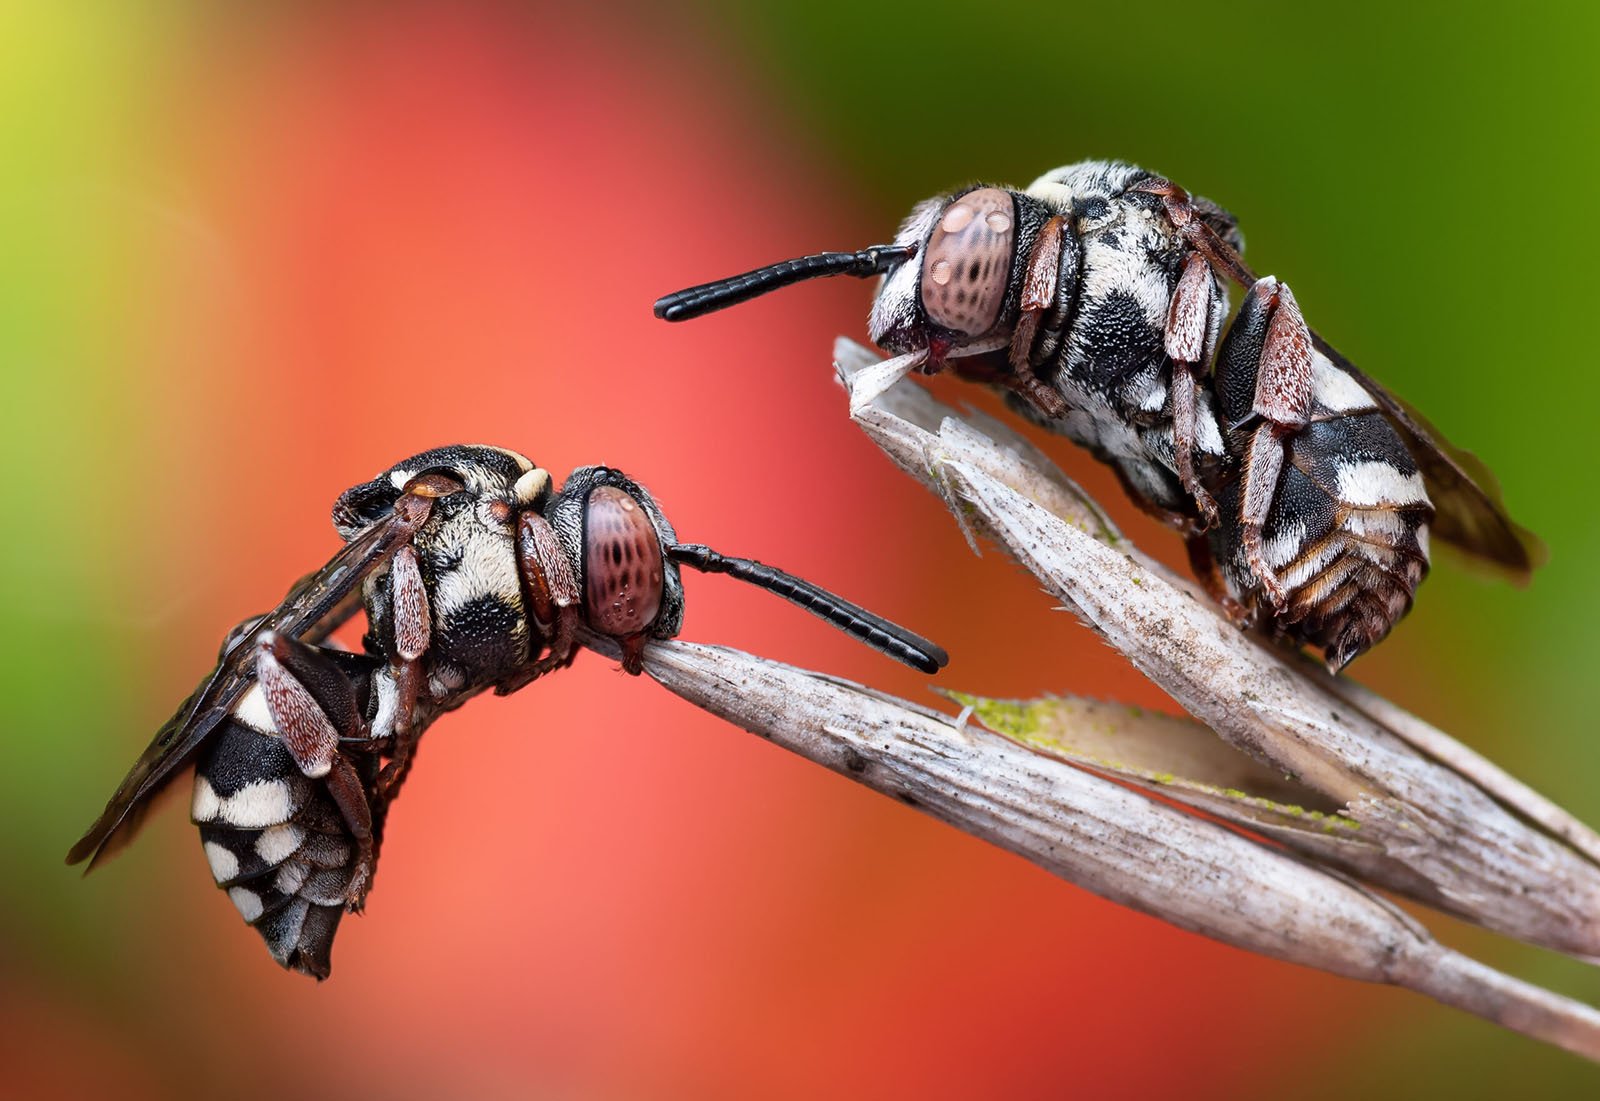 Close-up image of two cuckoo bees resting on thin twigs, facing each other against a blurred, colorful background. The bees display intricate patterns of black, white, and brown stripes on their bodies.